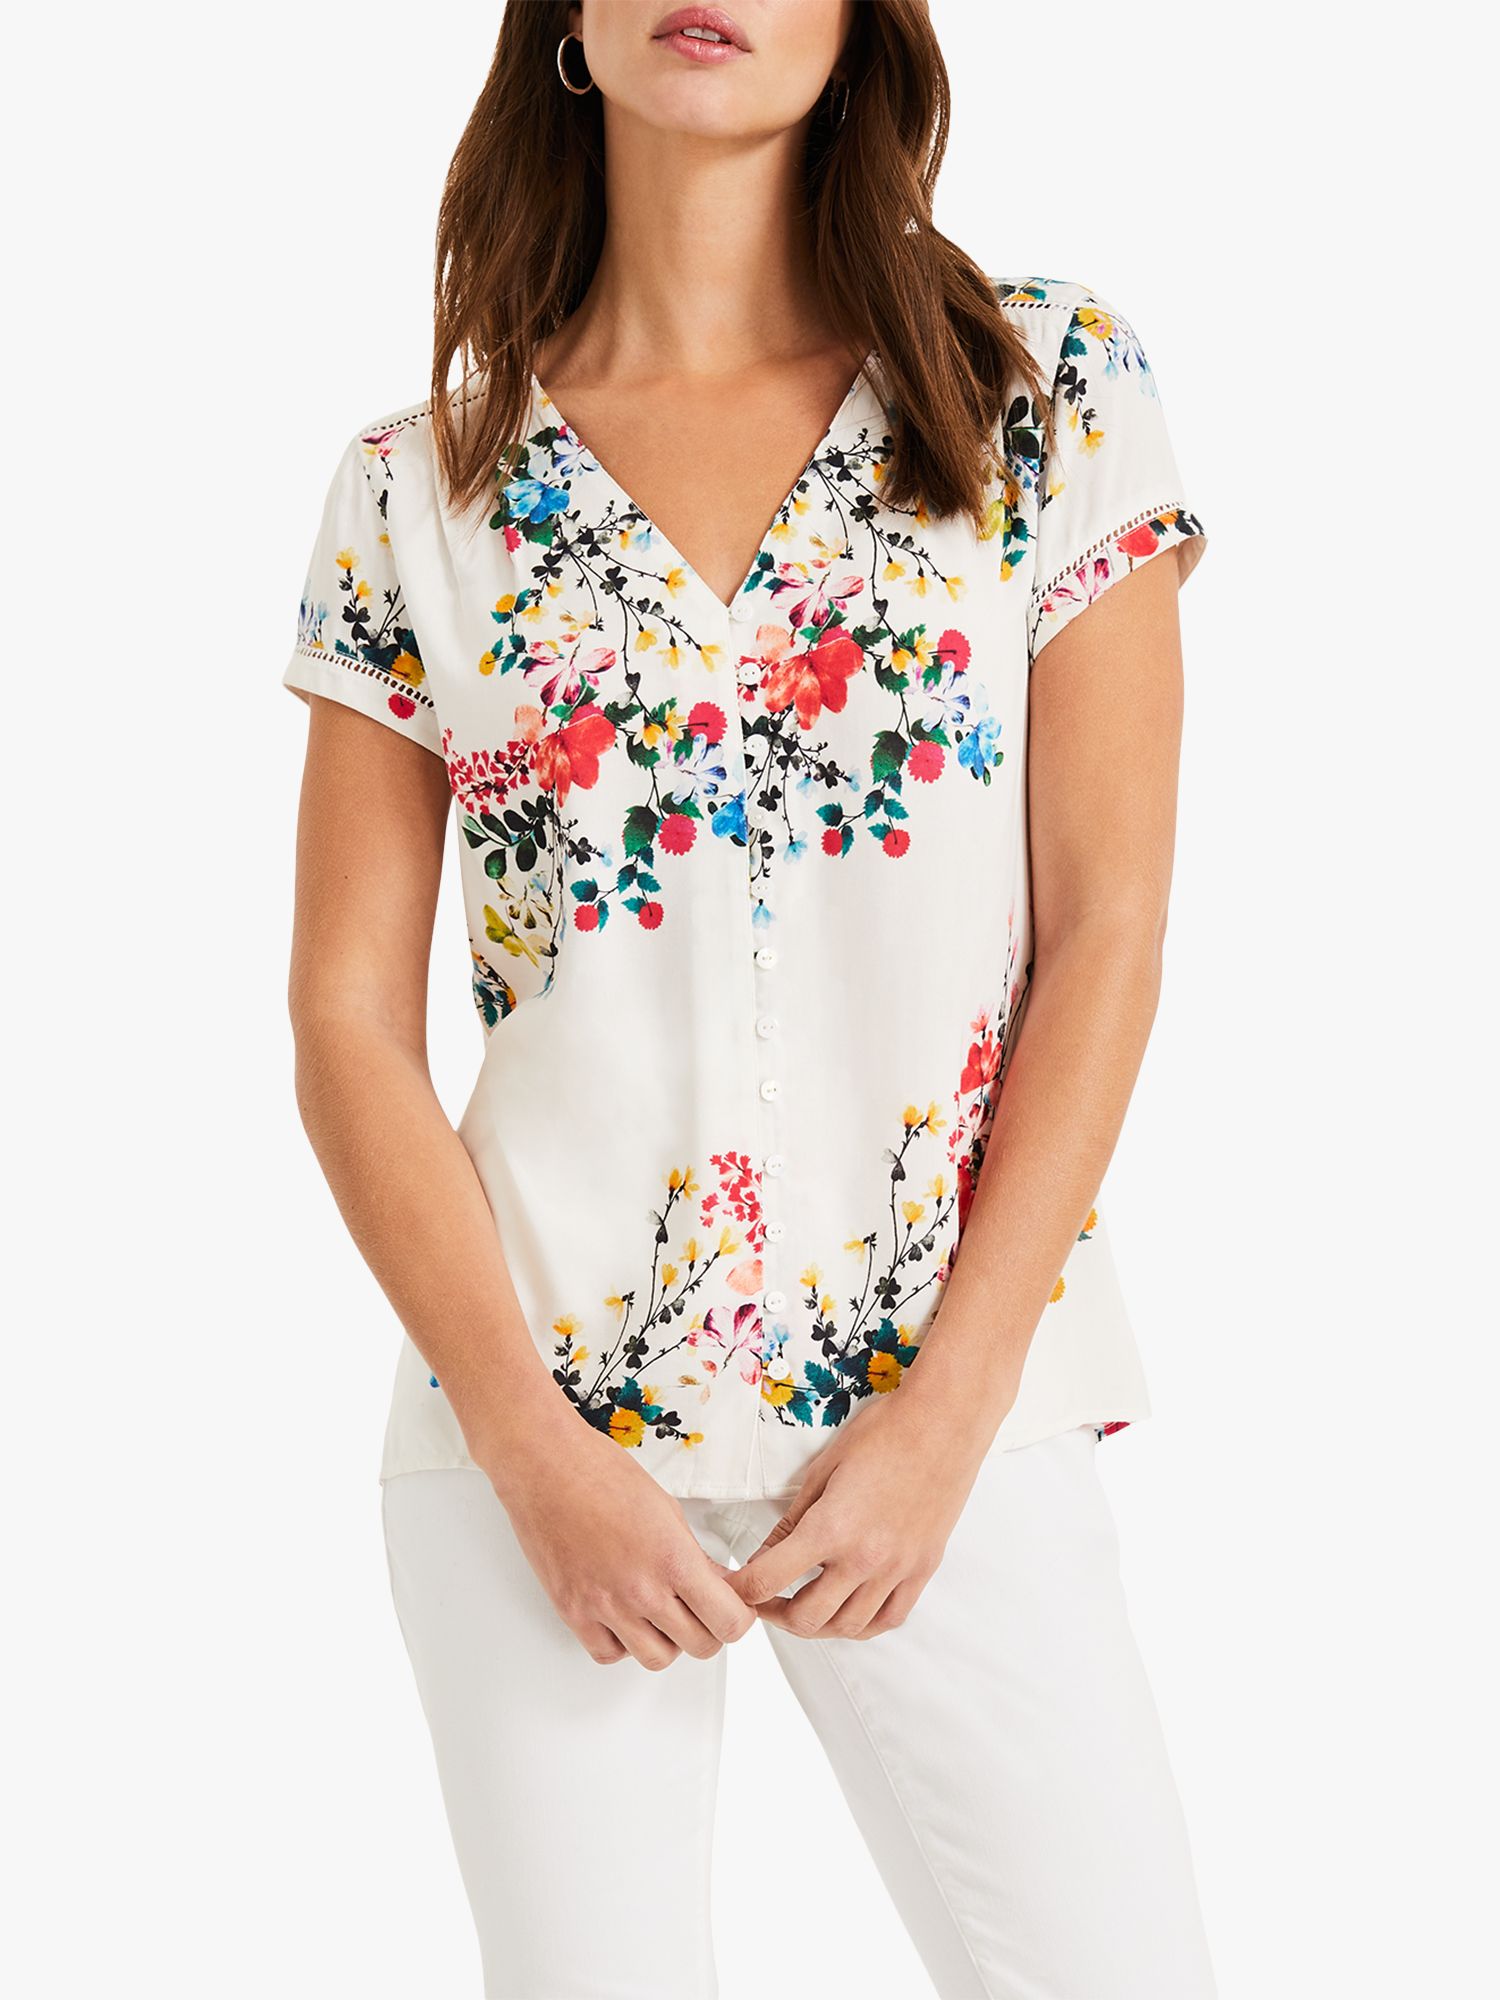 Phase Eight Avery Floral Print Blouse, Ivory/Multi